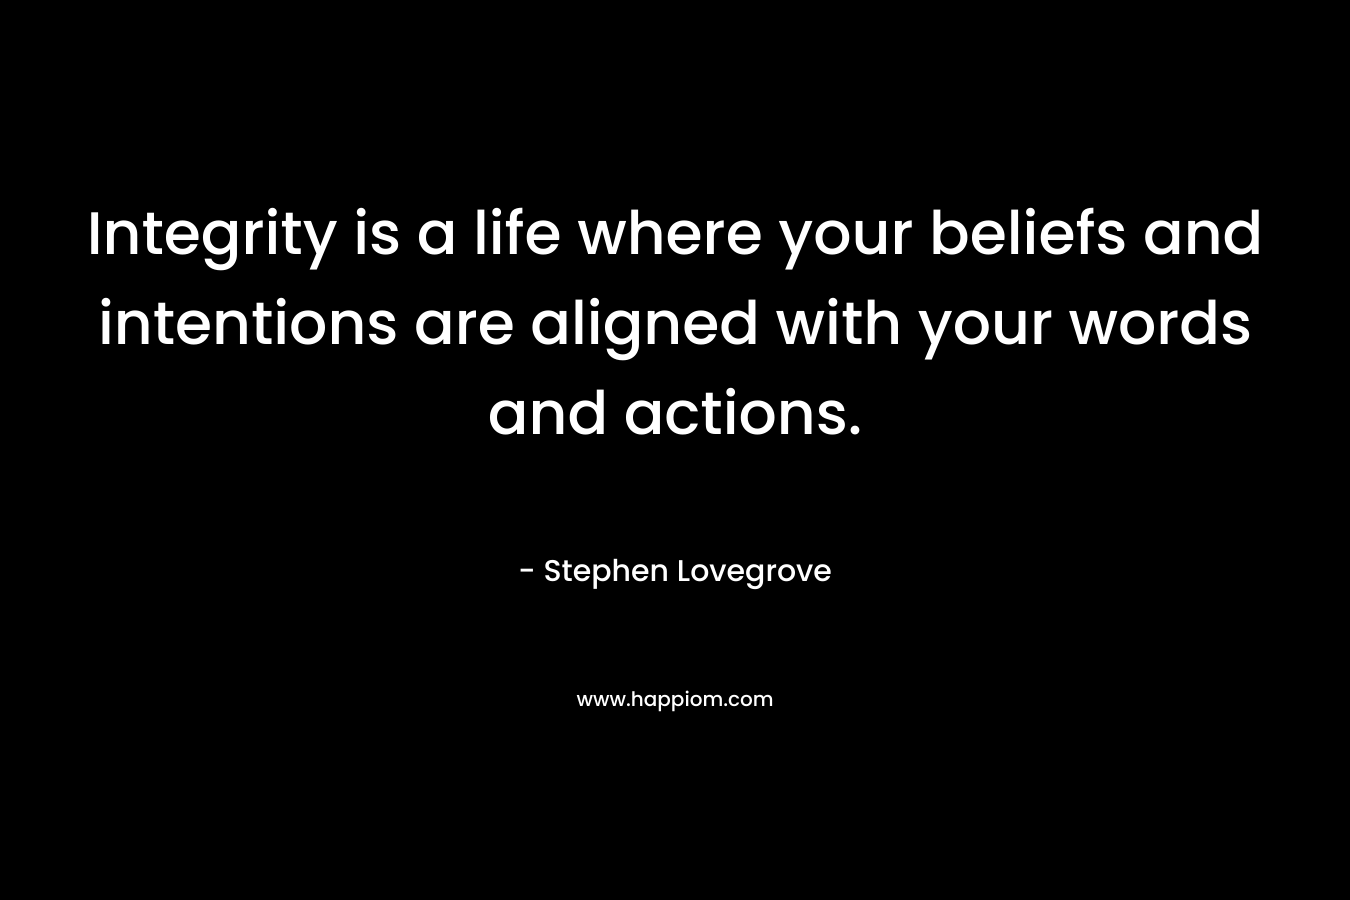 Integrity is a life where your beliefs and intentions are aligned with your words and actions. – Stephen Lovegrove